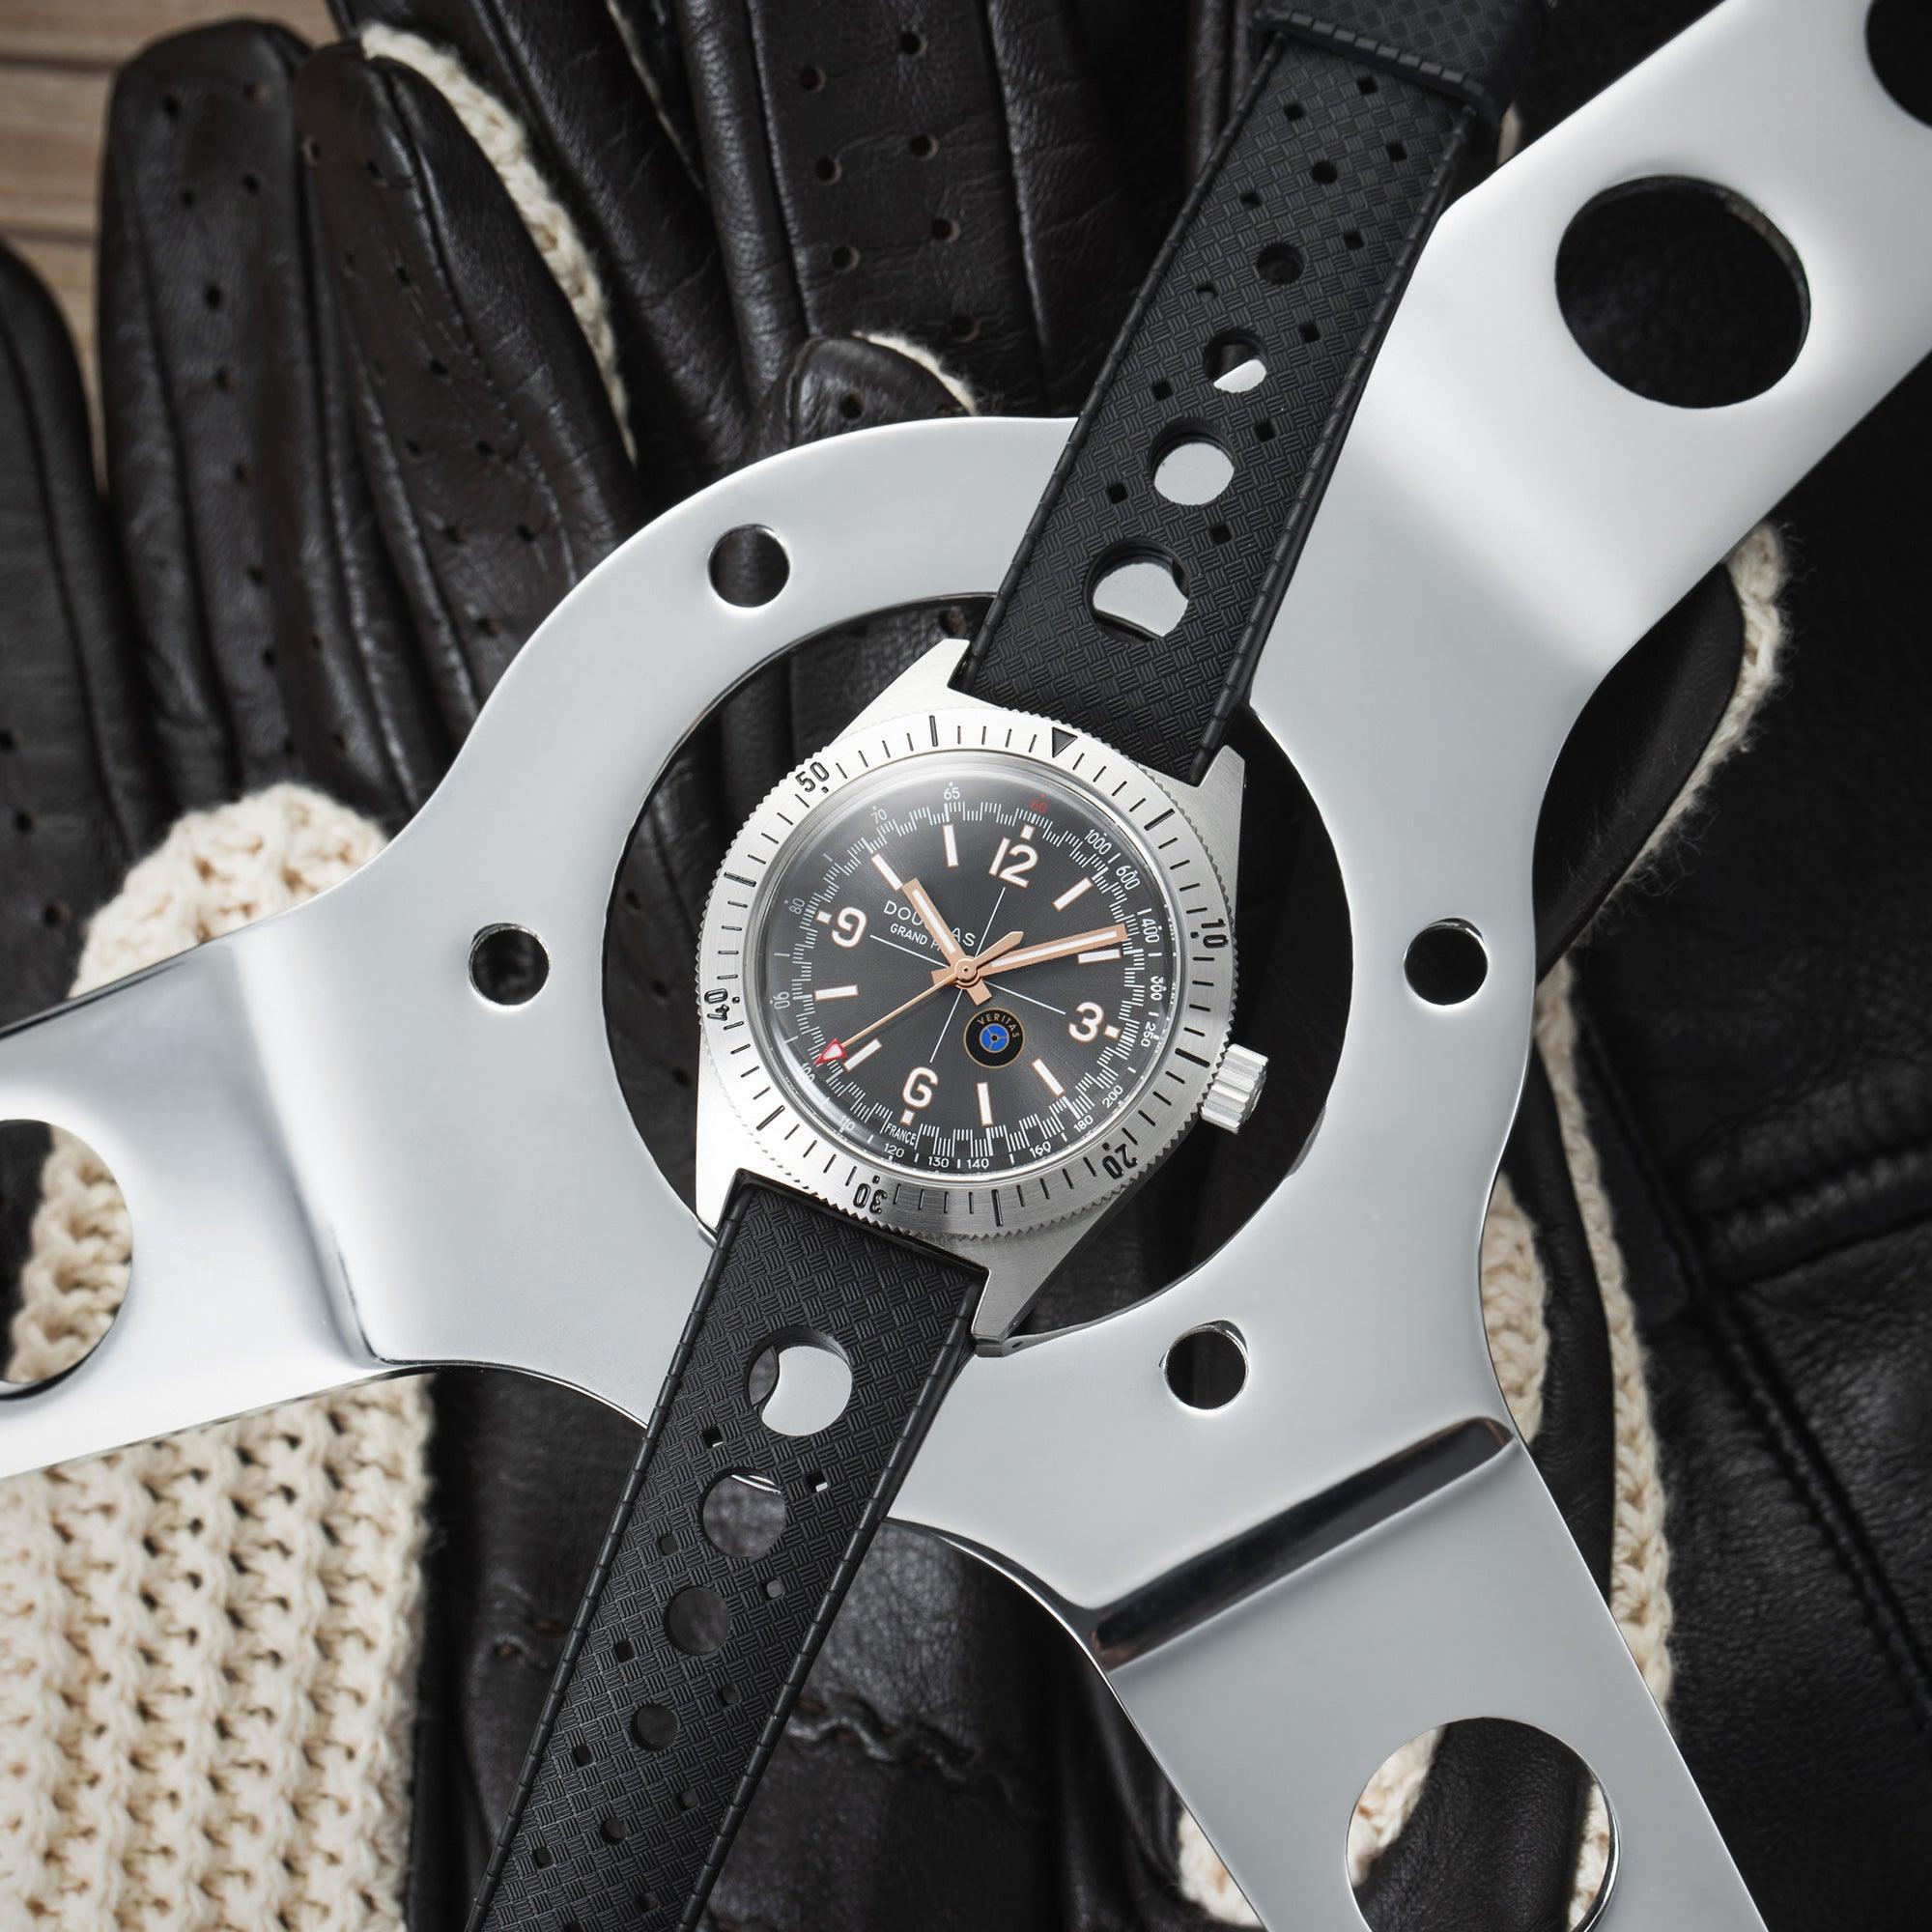 Grand Prix Professional Racing Watch – Veritas RSII Coupe Limited Edition - Wolbrook Watches